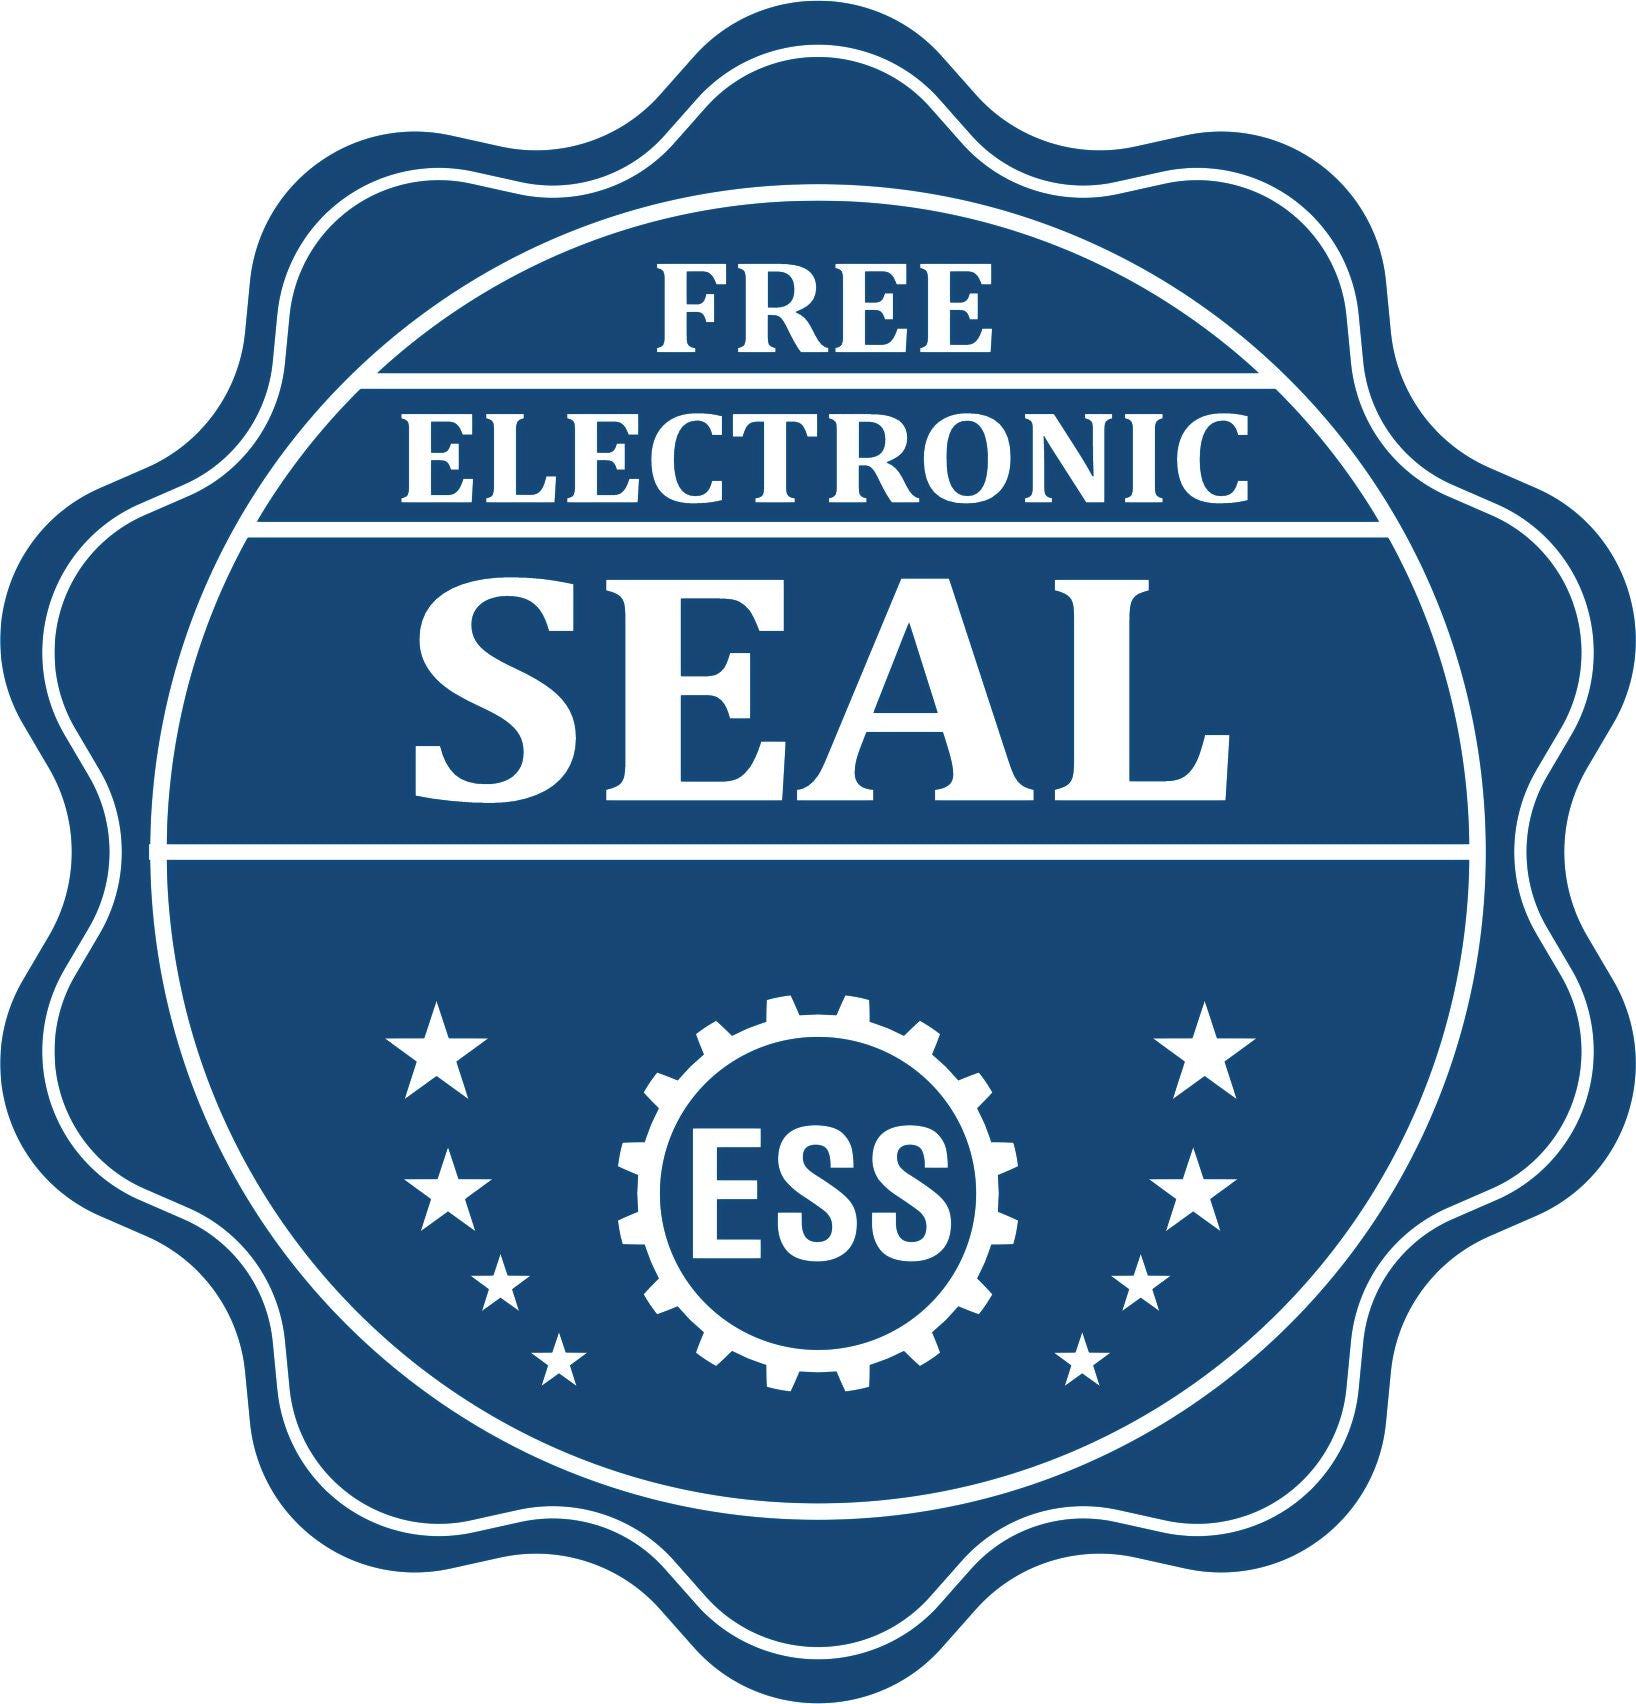 A badge showing a free electronic seal for the Oklahoma Professional Engineer Seal Stamp with stars and the ESS gear on the emblem.